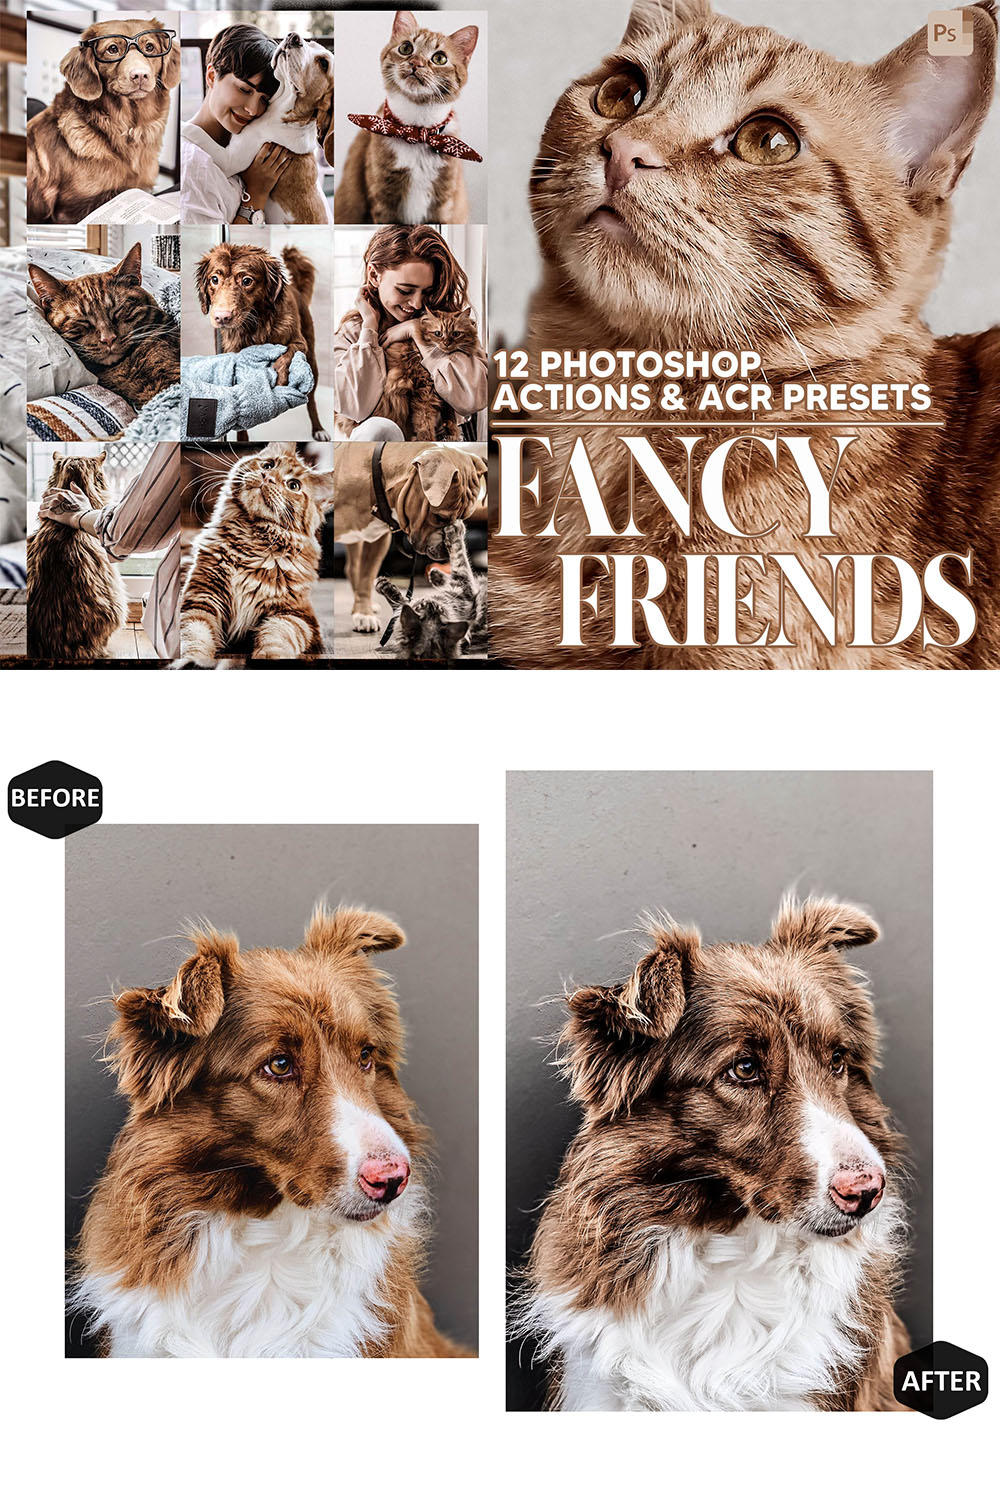 12 Photoshop Actions, Fancy Friends Ps Action, Animal ACR Preset, Doggie Ps Filter, Atn Portrait And Lifestyle Theme For Instagram, Blogger pinterest preview image.